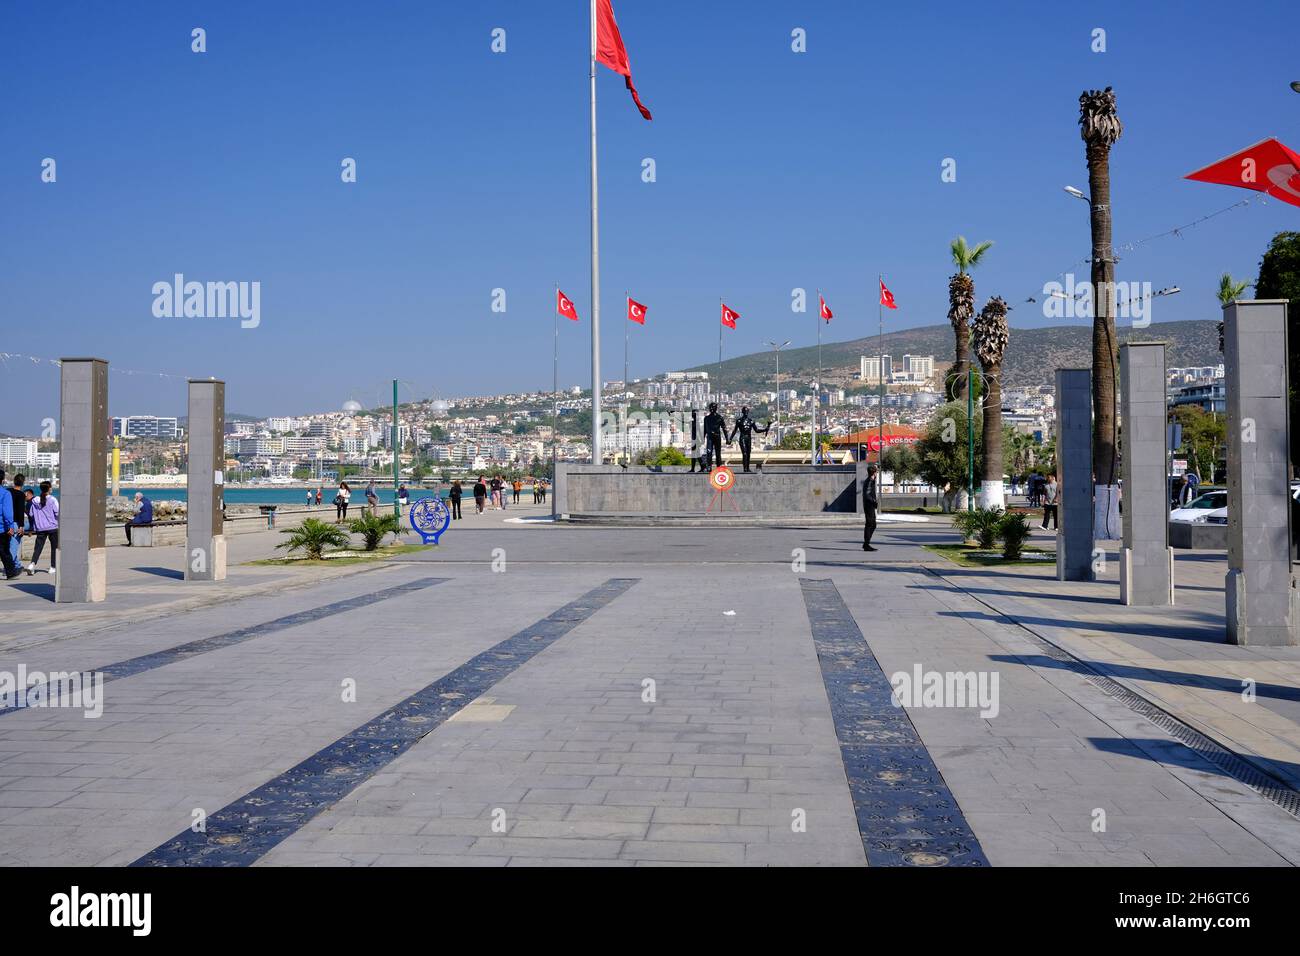 Statues of Ataturk and a young man and woman in Kusadasi, Turkey. The  statues symbolize peace and hope for the future Stock Photo